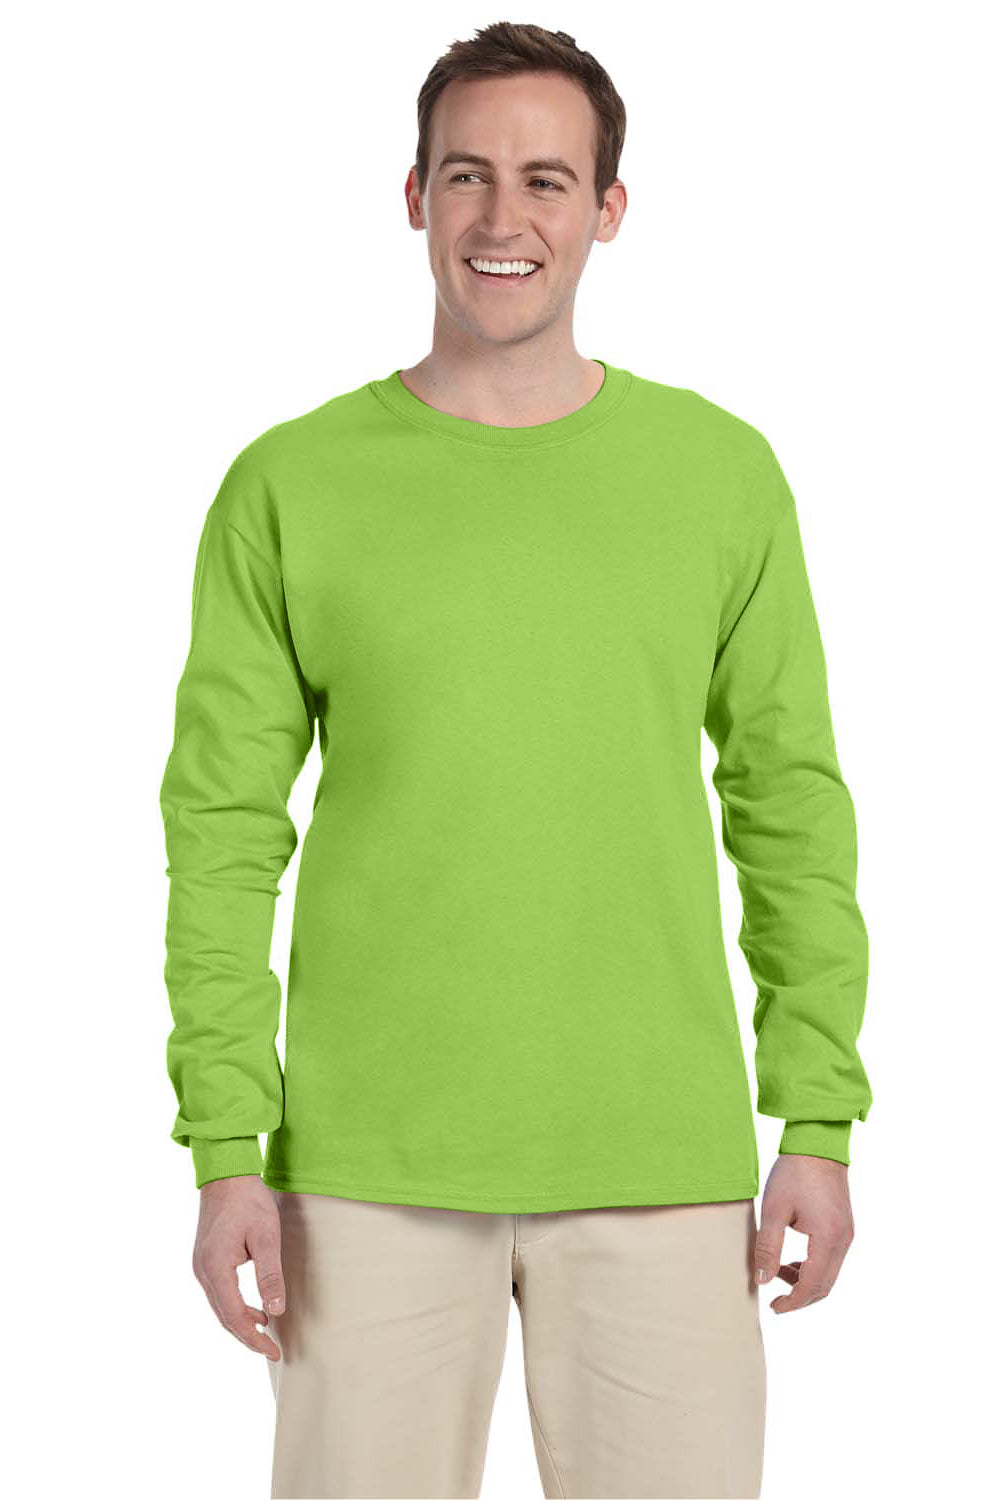 Fruit Of The Loom 4930 Mens HD Jersey Long Sleeve Crewneck T-Shirt Neon Green Front